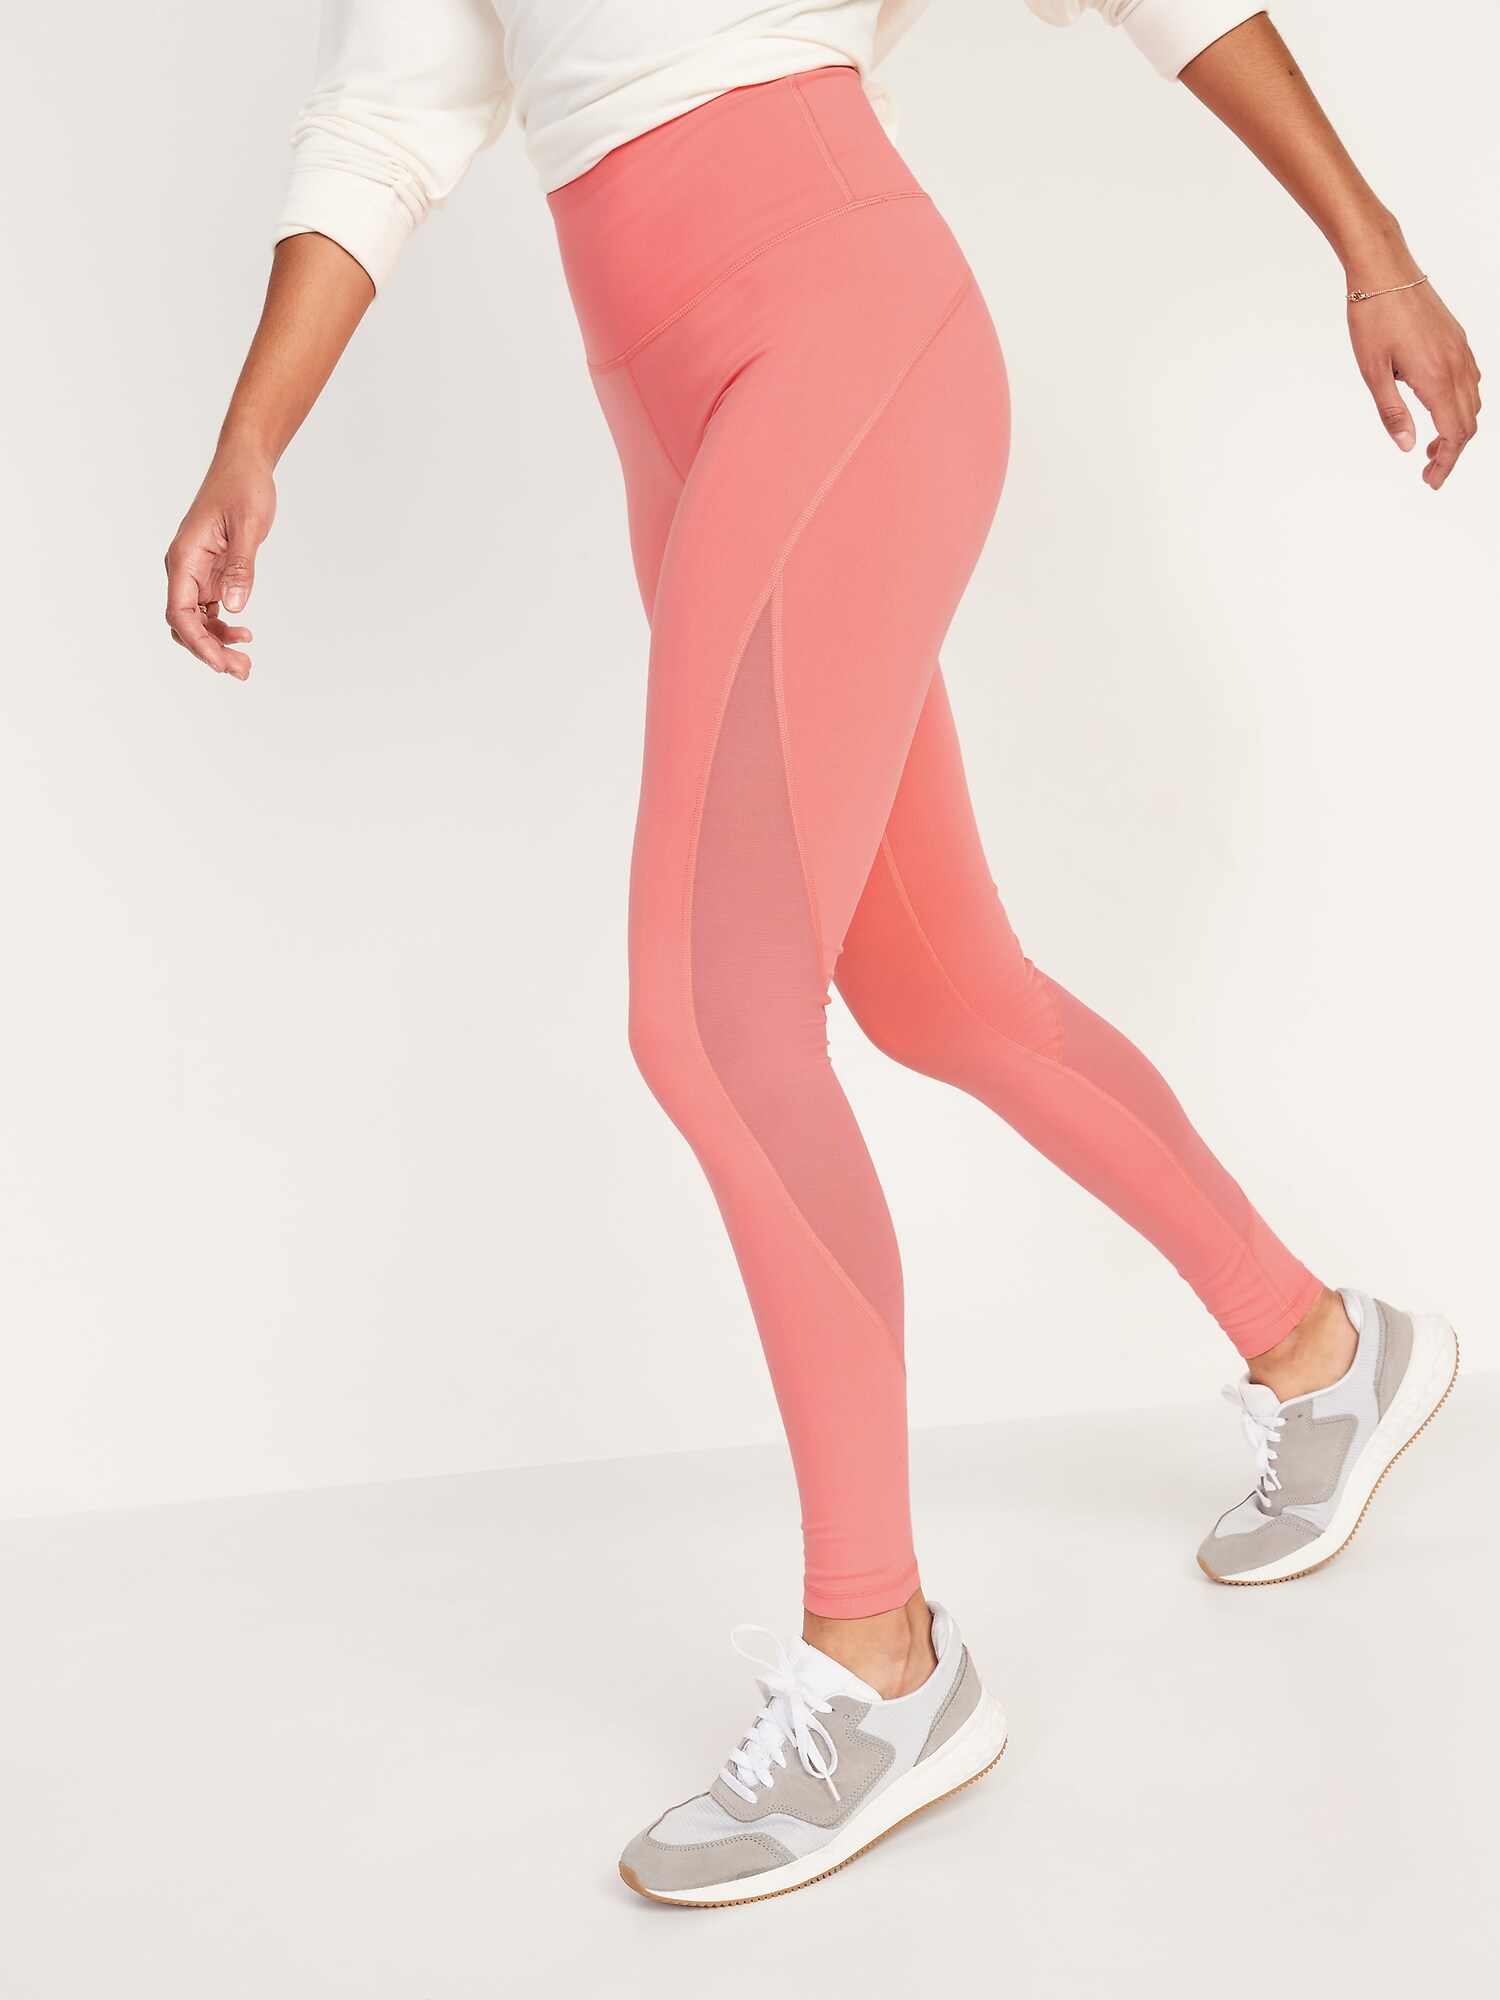 High Waisted Elevate Mesh Trim Compression Leggings For Women Old Navy